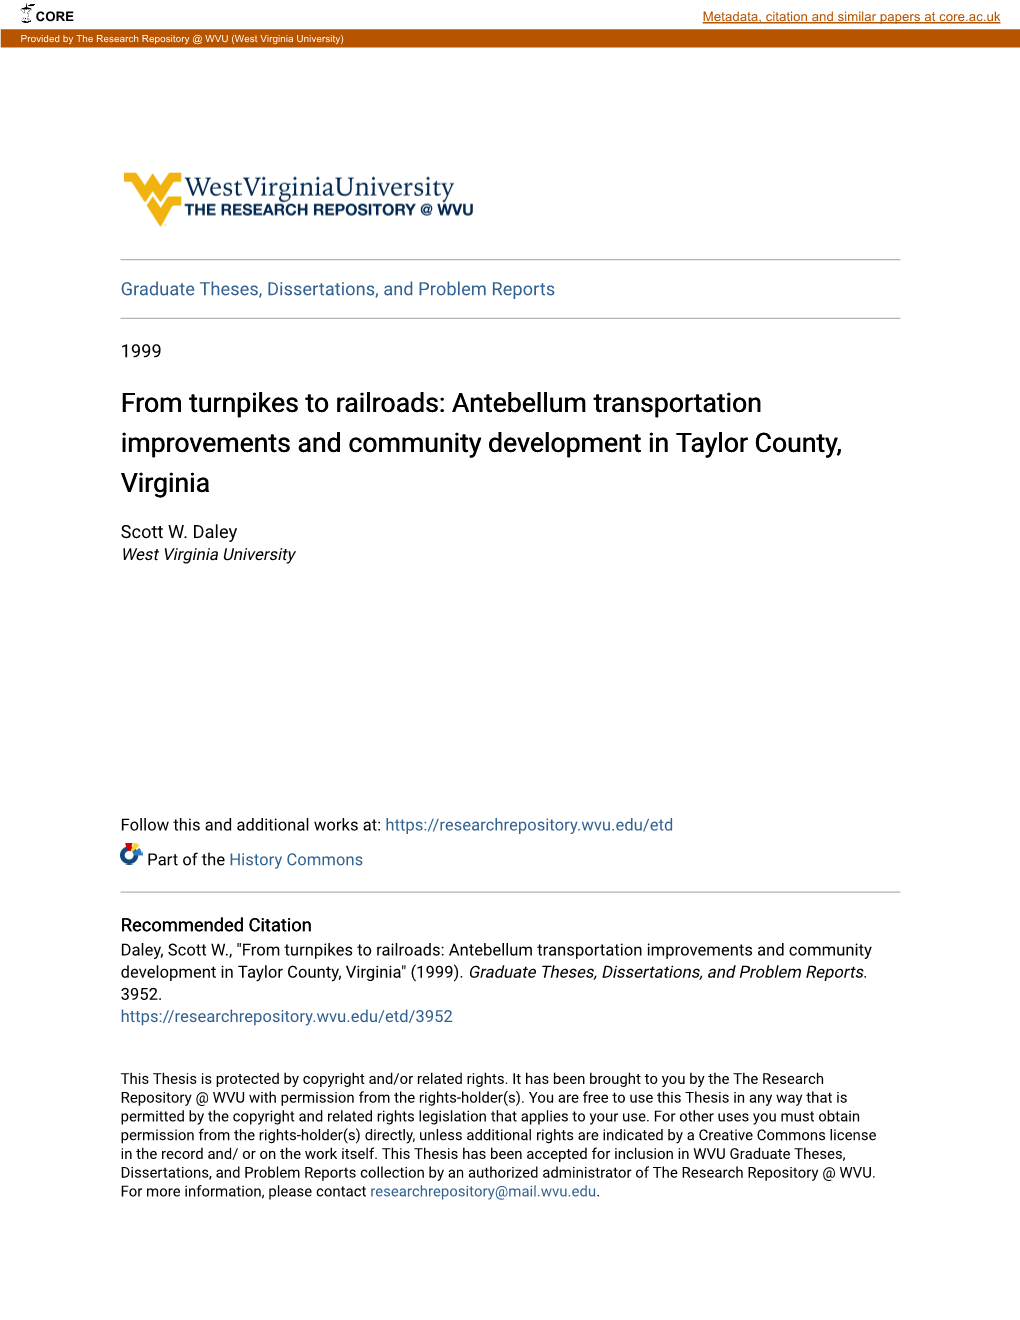 From Turnpikes to Railroads: Antebellum Transportation Improvements and Community Development in Taylor County, Virginia